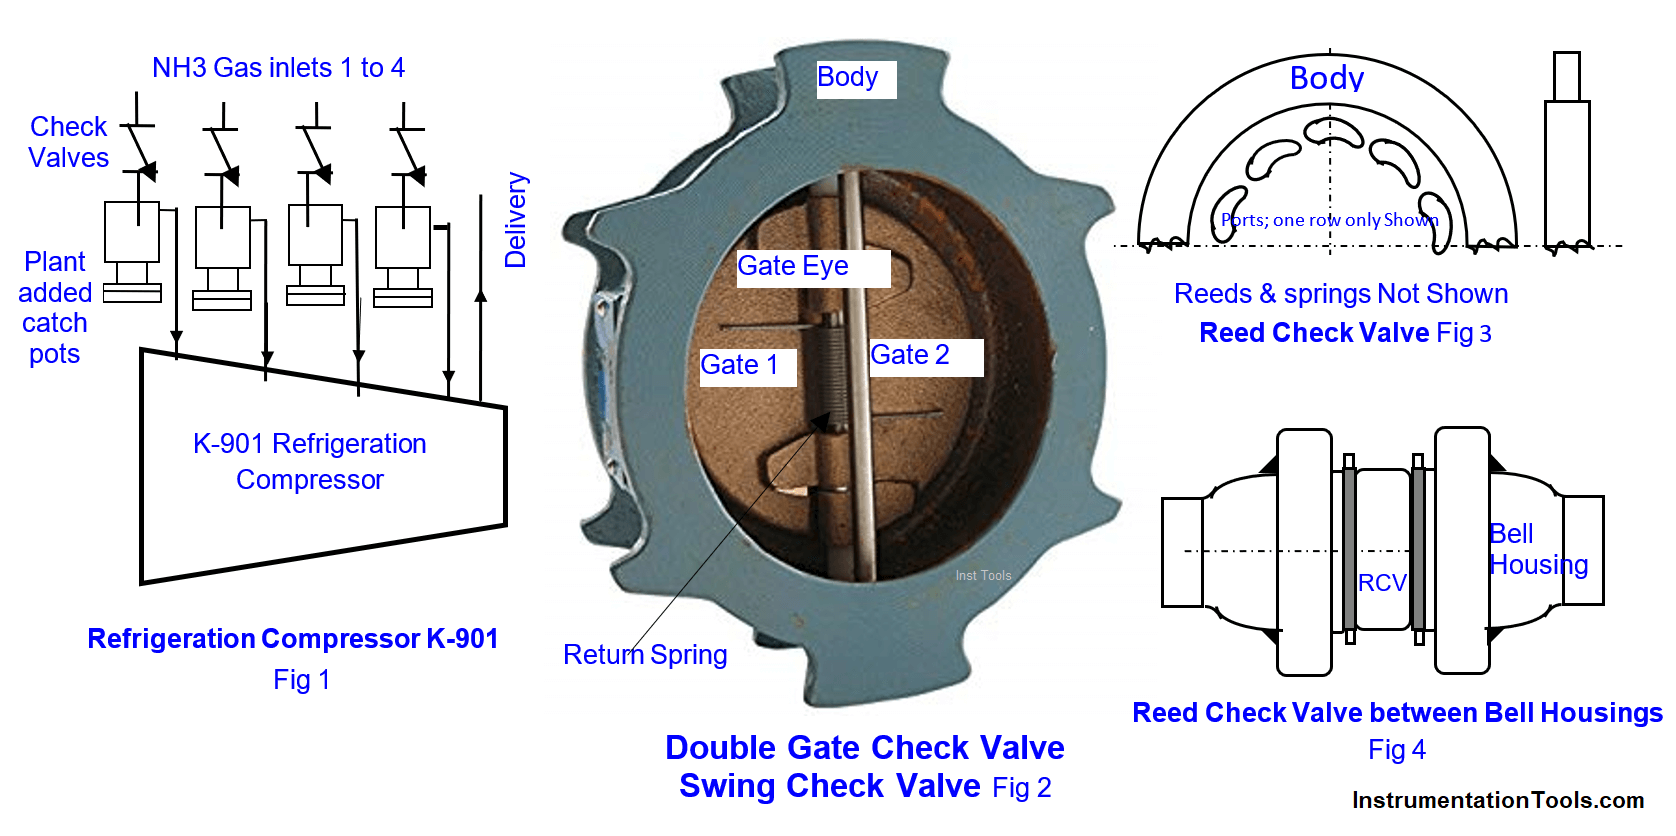 Malfunctioning Inlet Check Valves